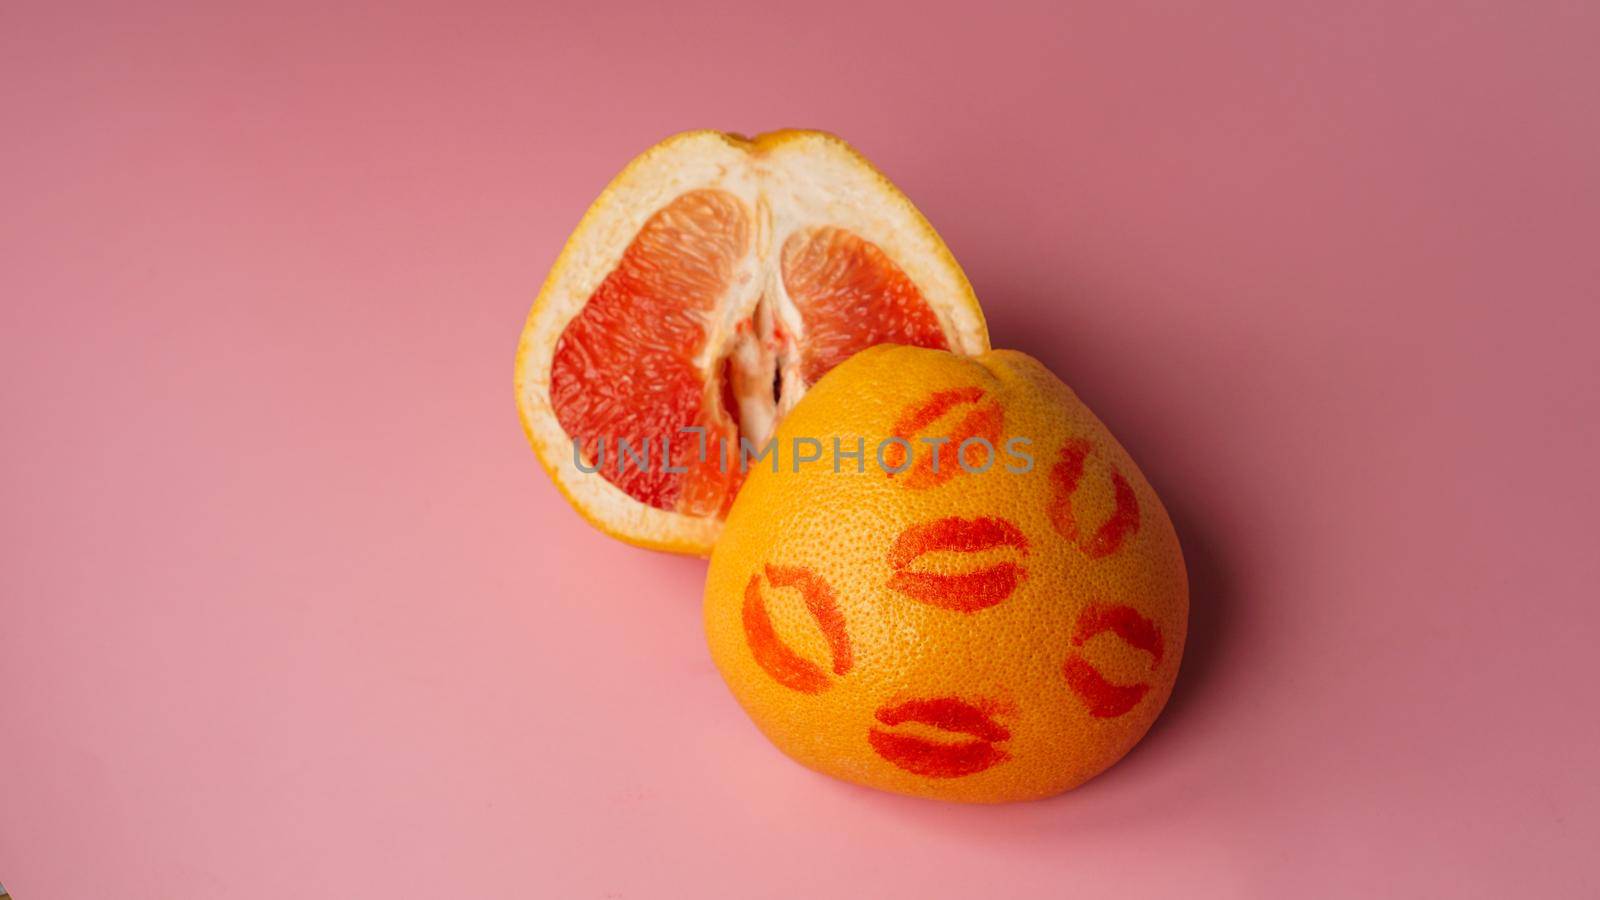 Composition with grapefruit with traces of red lipstick on pink background